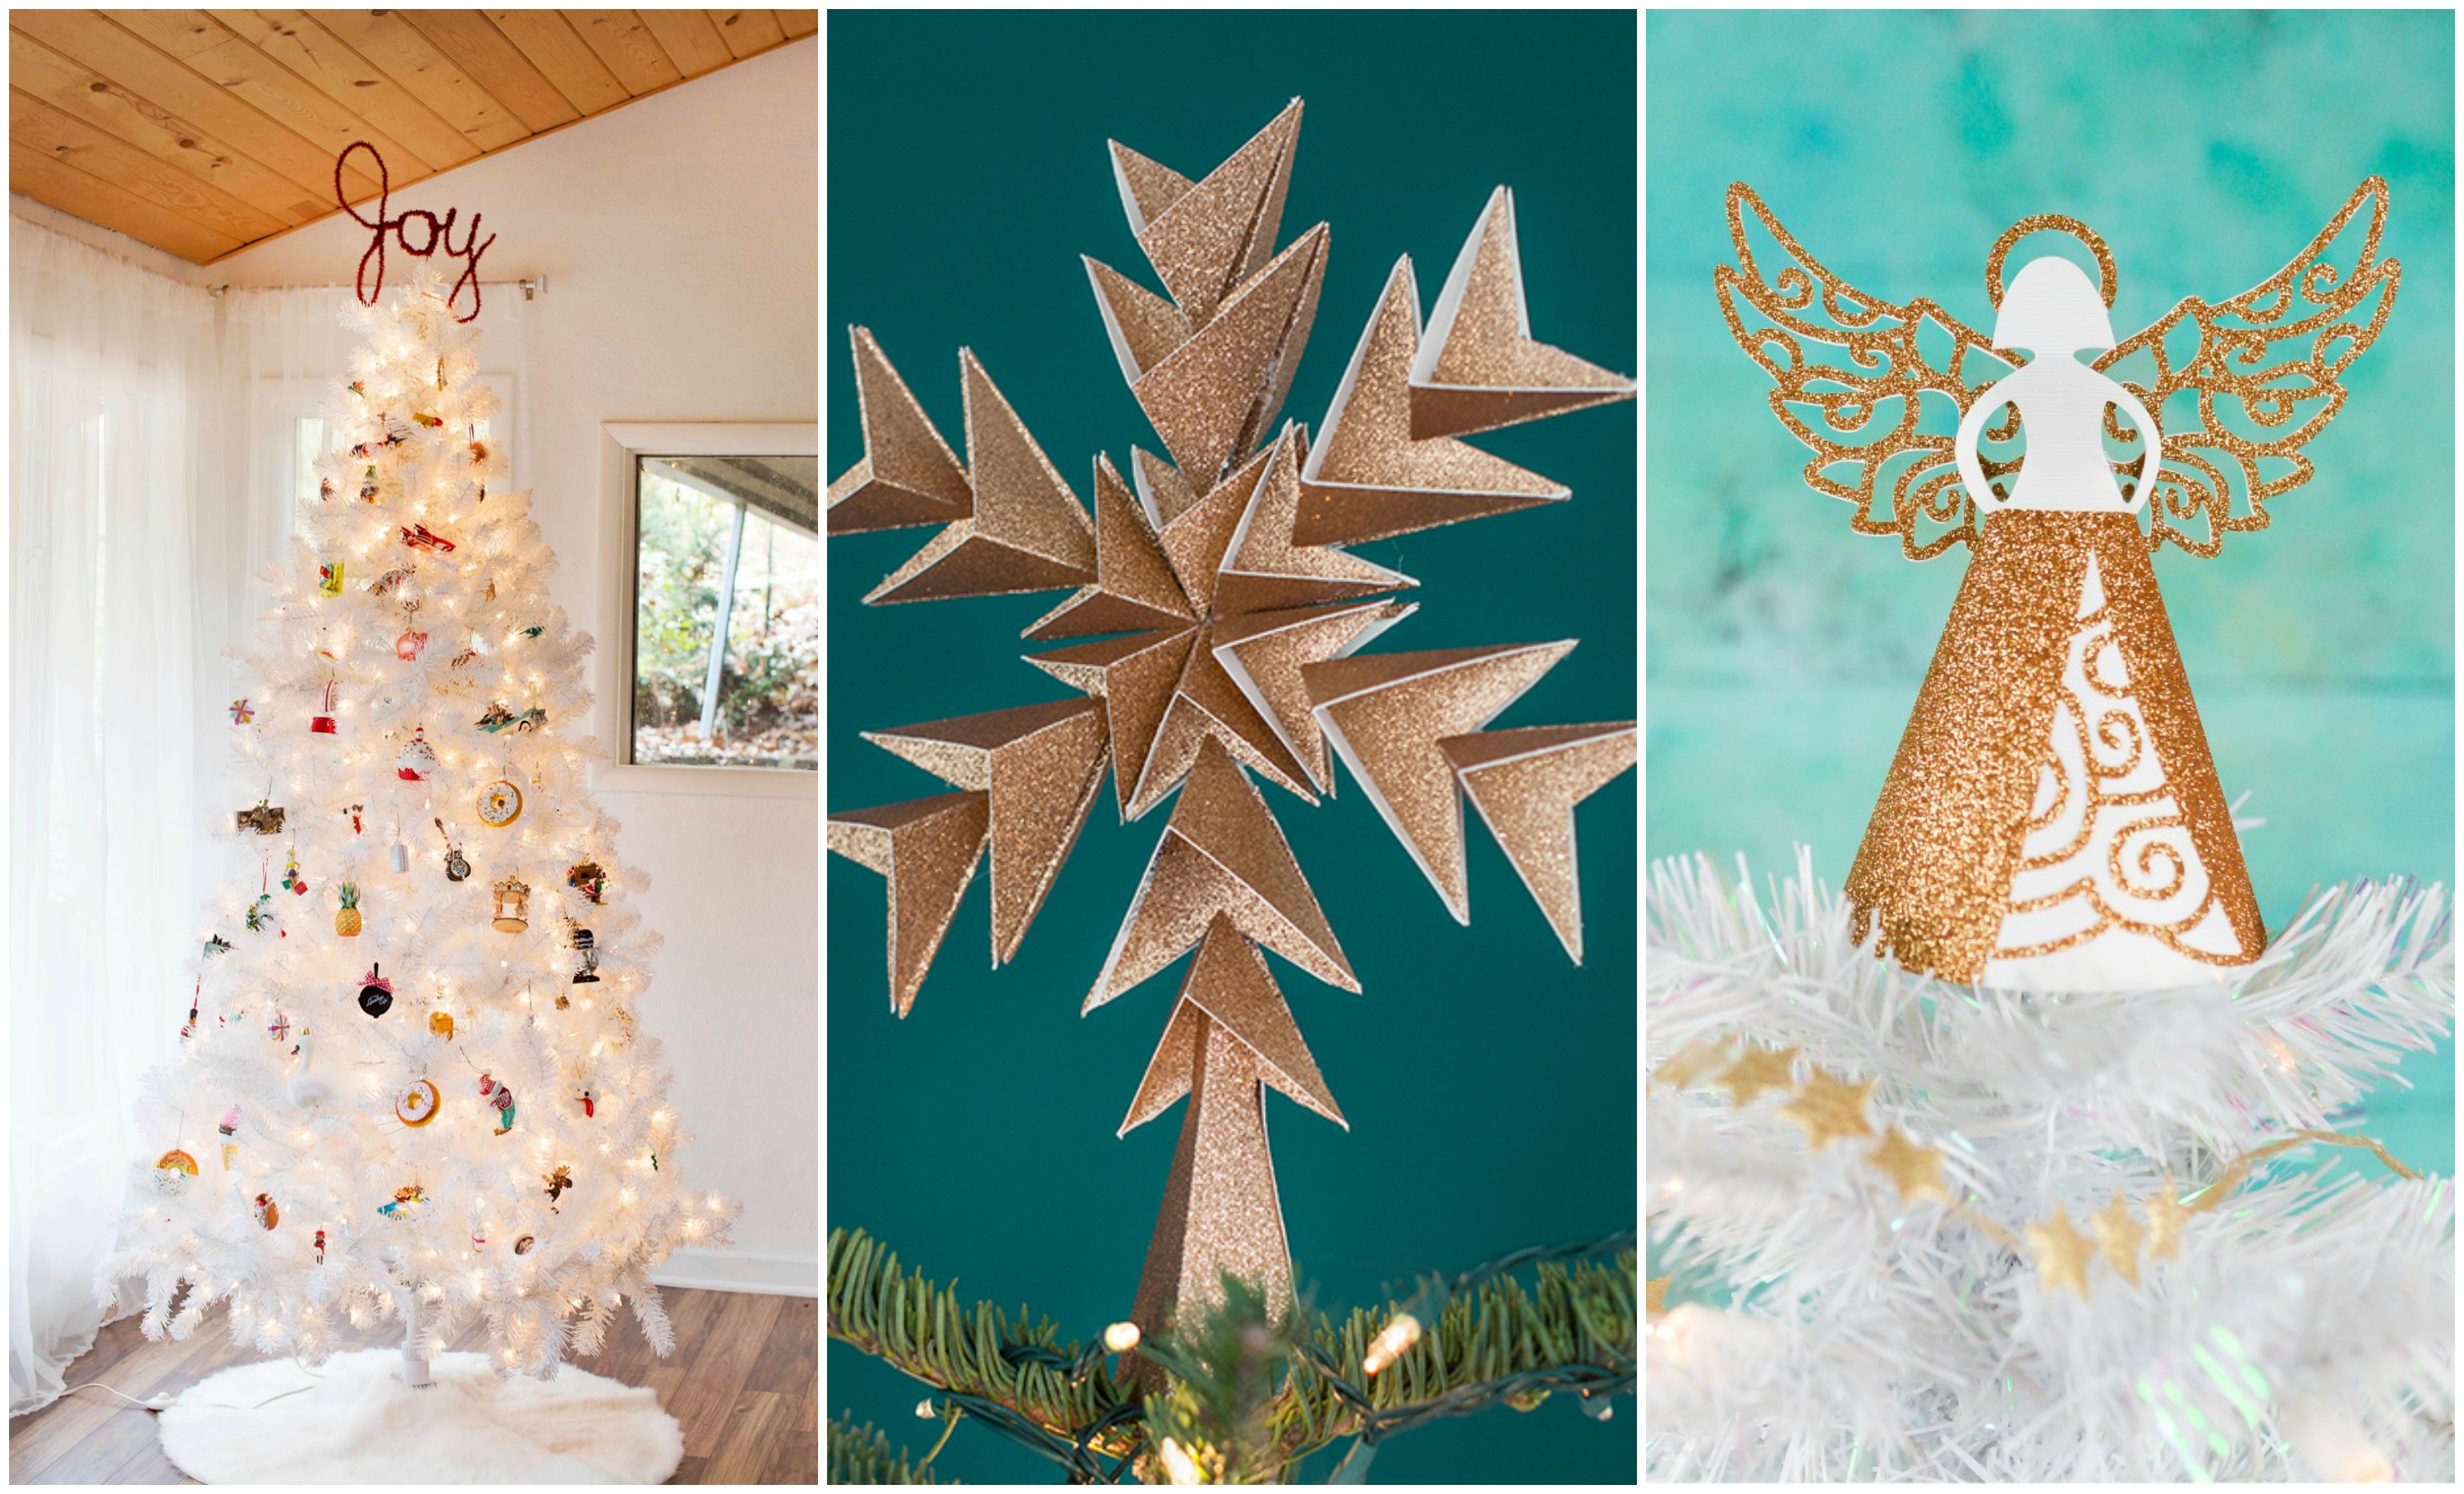 stavelse Ithaca Gå op 9 Ideas for Your Christmas Tree Topper - Make and Takes